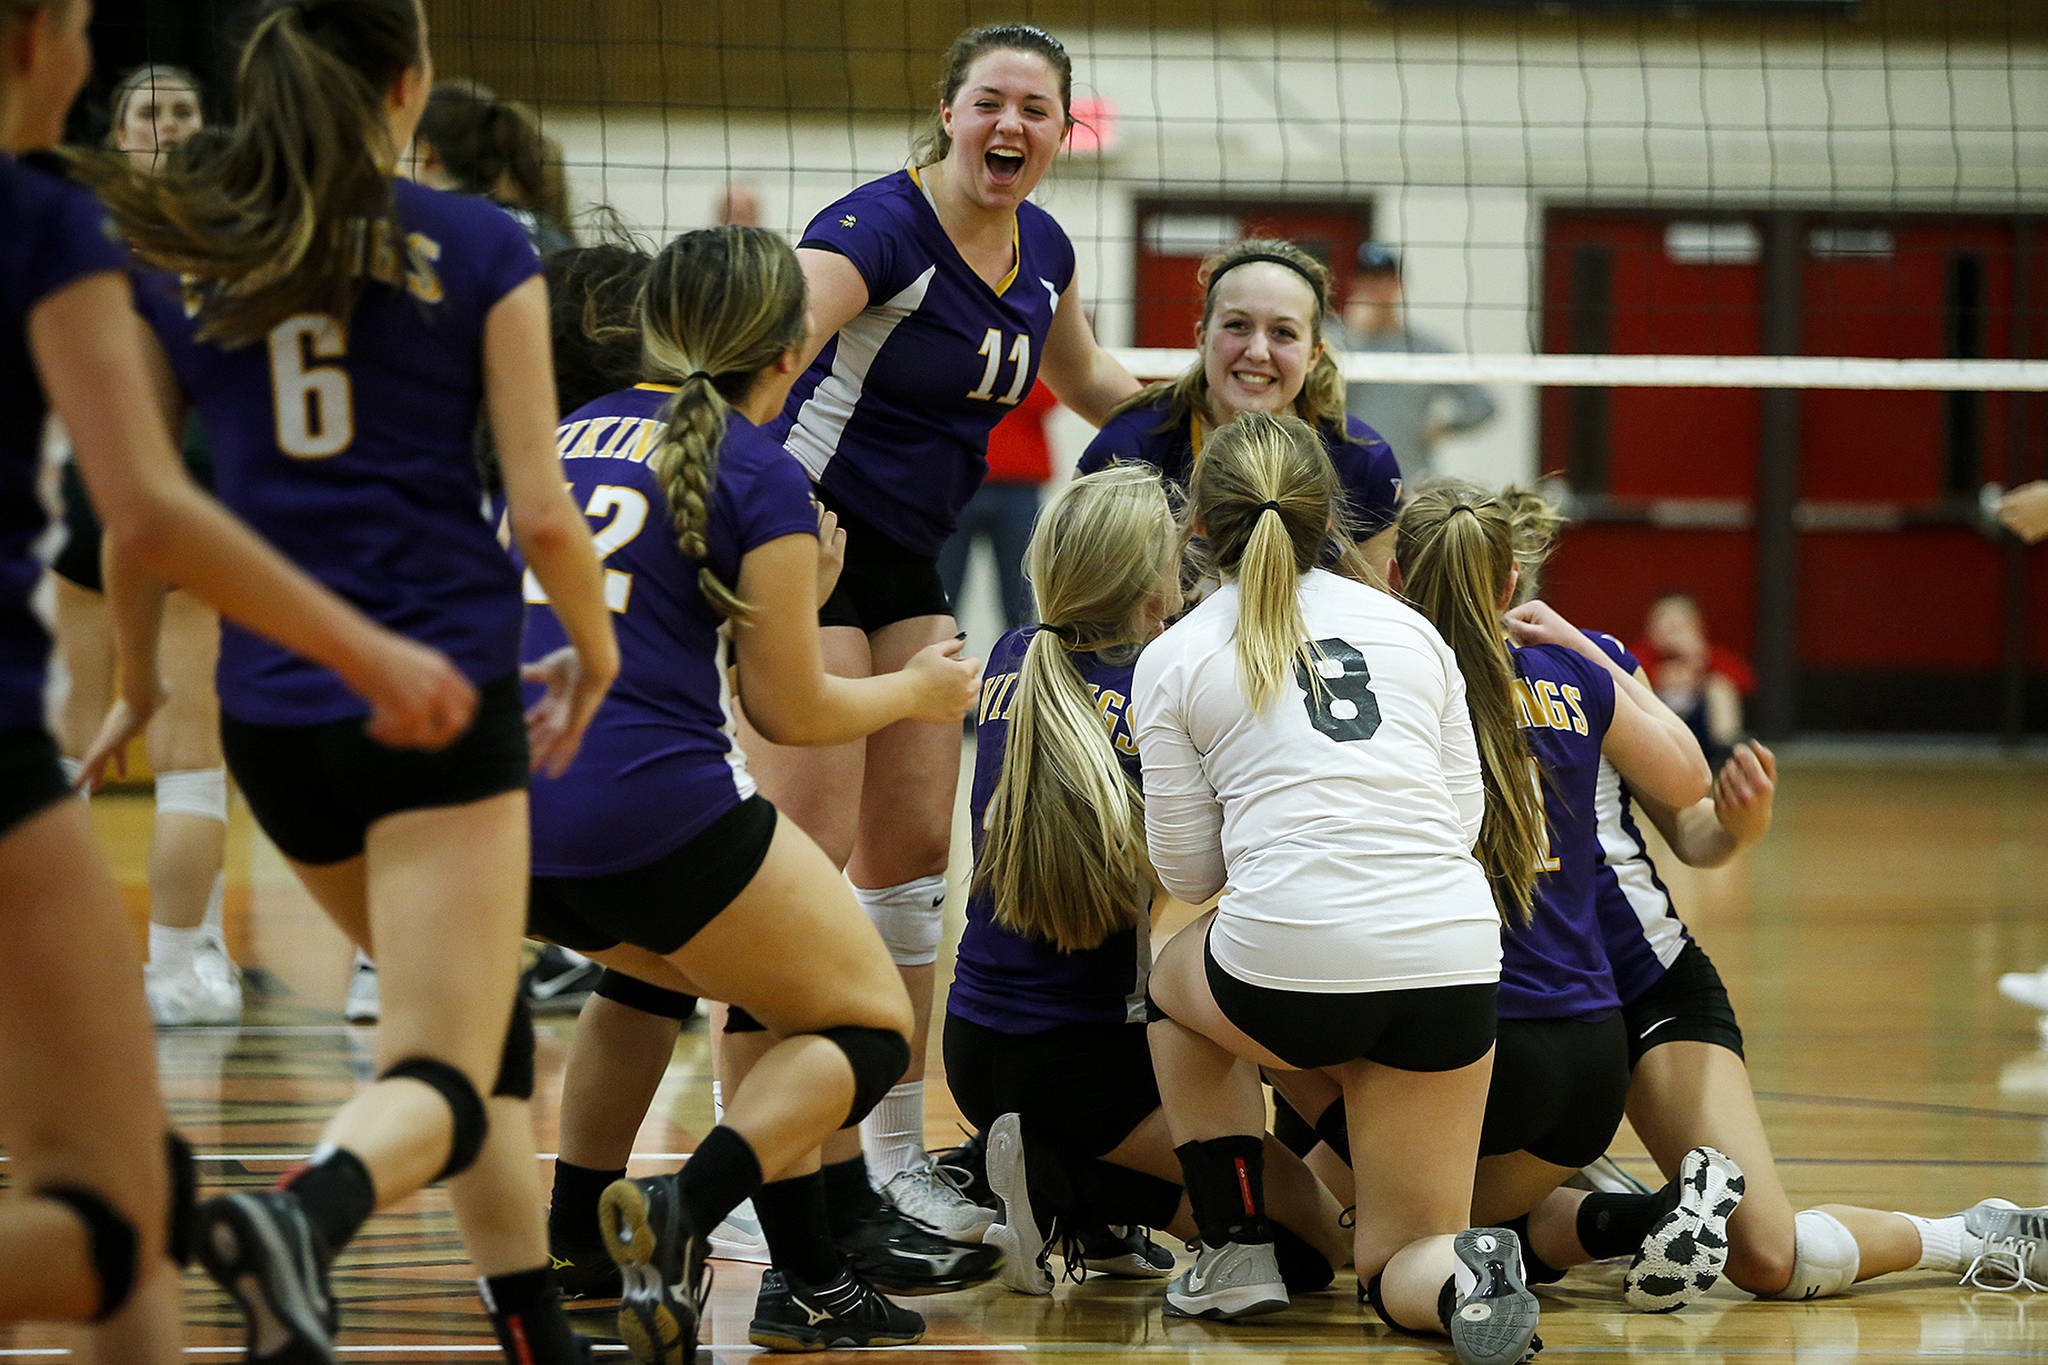 The Lake Stevens volleyball team celebrates its victory over Jackson in the 4A District 1 championship match on Thursday at Marysville Pilchuck High School. The Vikings clinched a state tournament berth with the three-set sweep. (Ian Terry / The Herald)